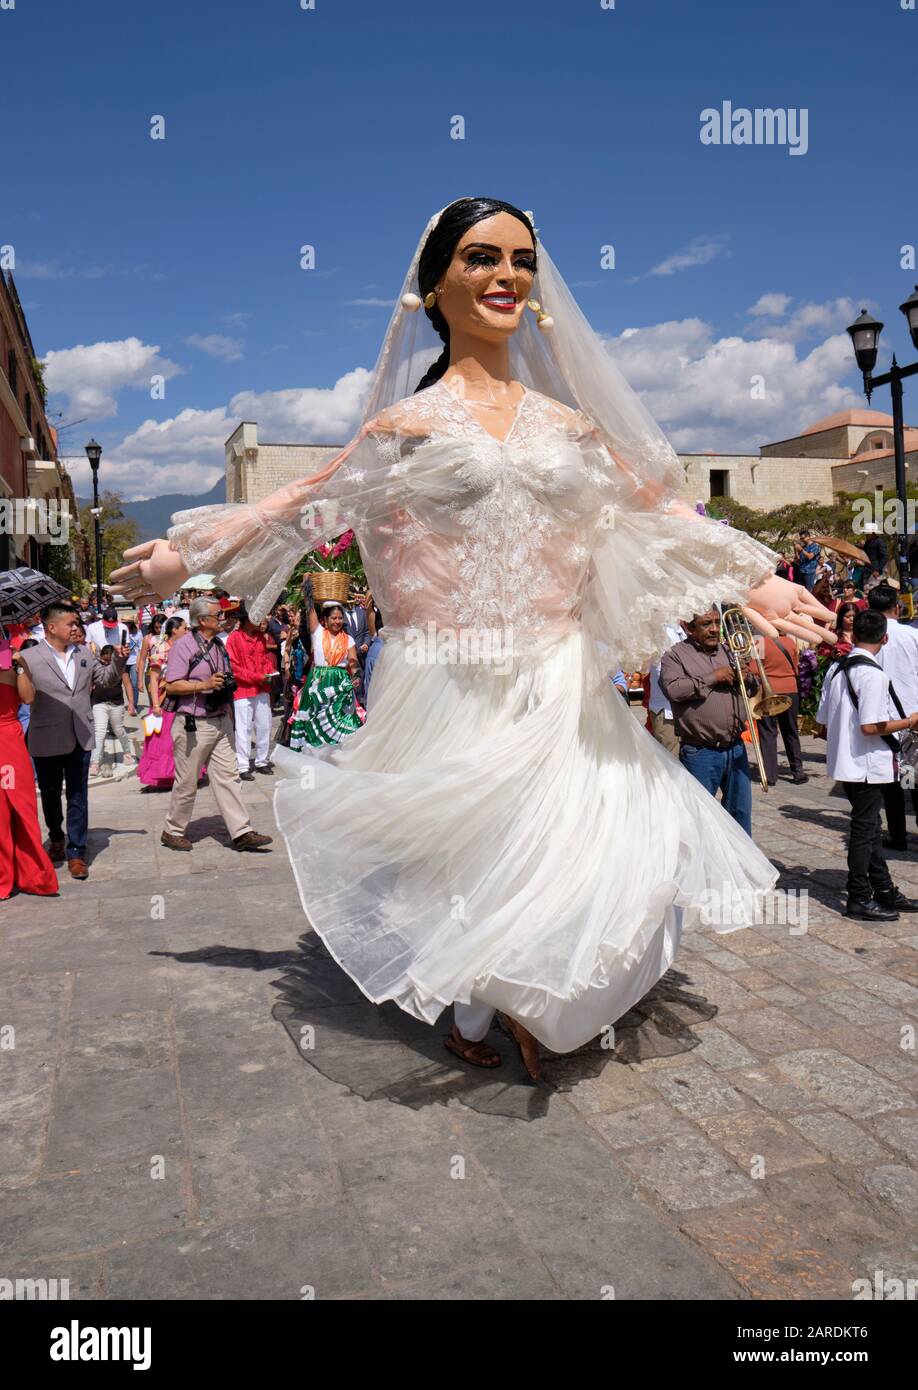 Giant puppet of the Bride spinning and dancing Part of Traditional wedding parade (Calenda de Bodas) on the streets of Oaxaca. Stock Photo